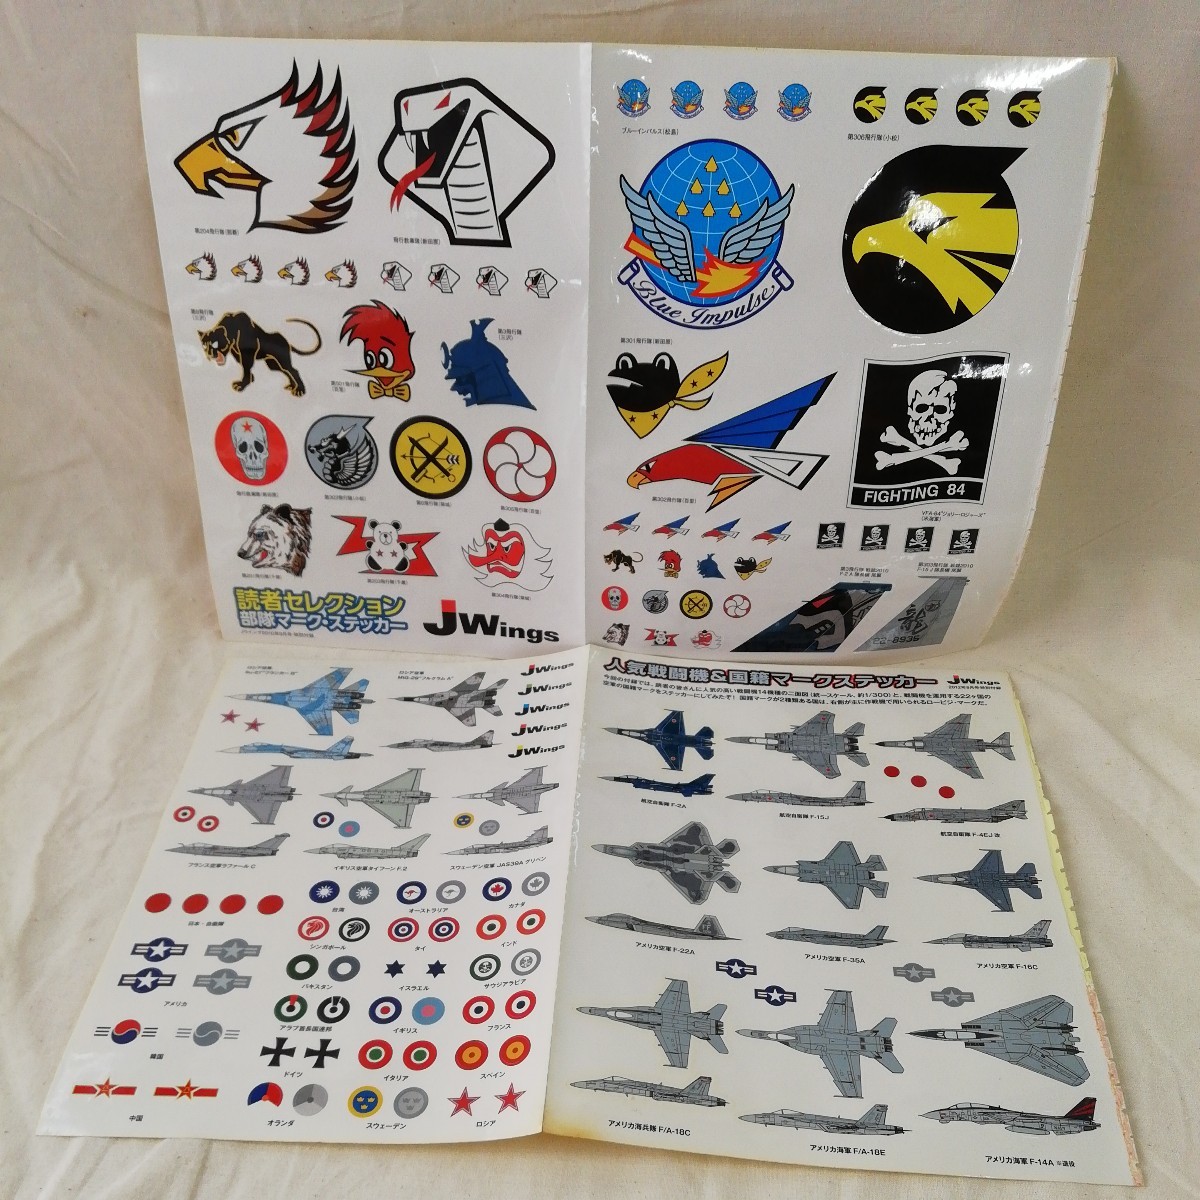 g_t　P599　航空自衛隊　飛行隊　ロゴマーク　ステッカー　クリアファイル　まとめ売り　JAL　JASDF　JWings　中古_画像4